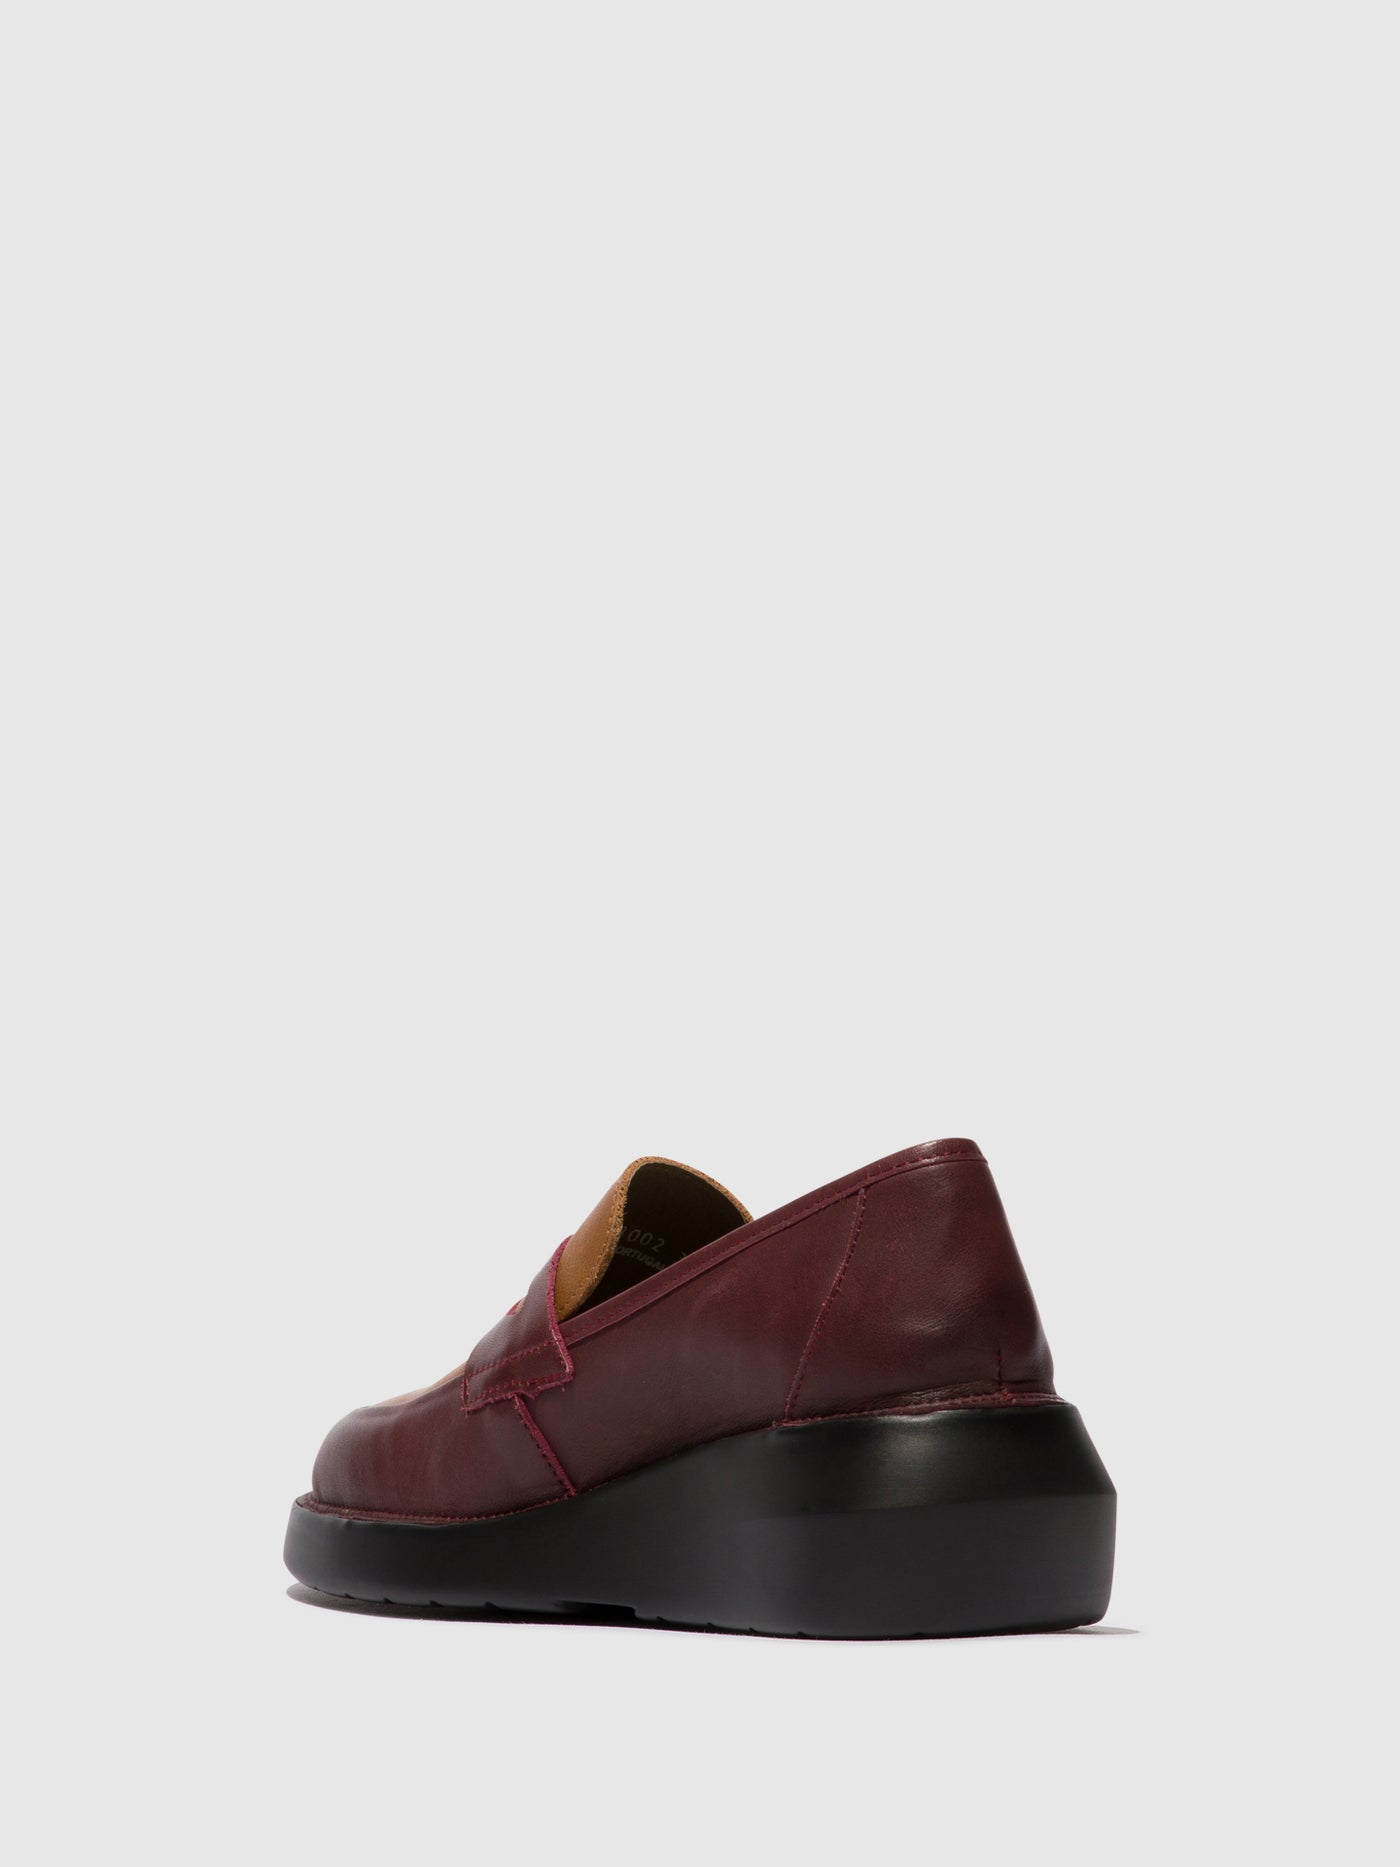 Loafers Shoes BLAR513FLY BORDEAUX/CUOIO